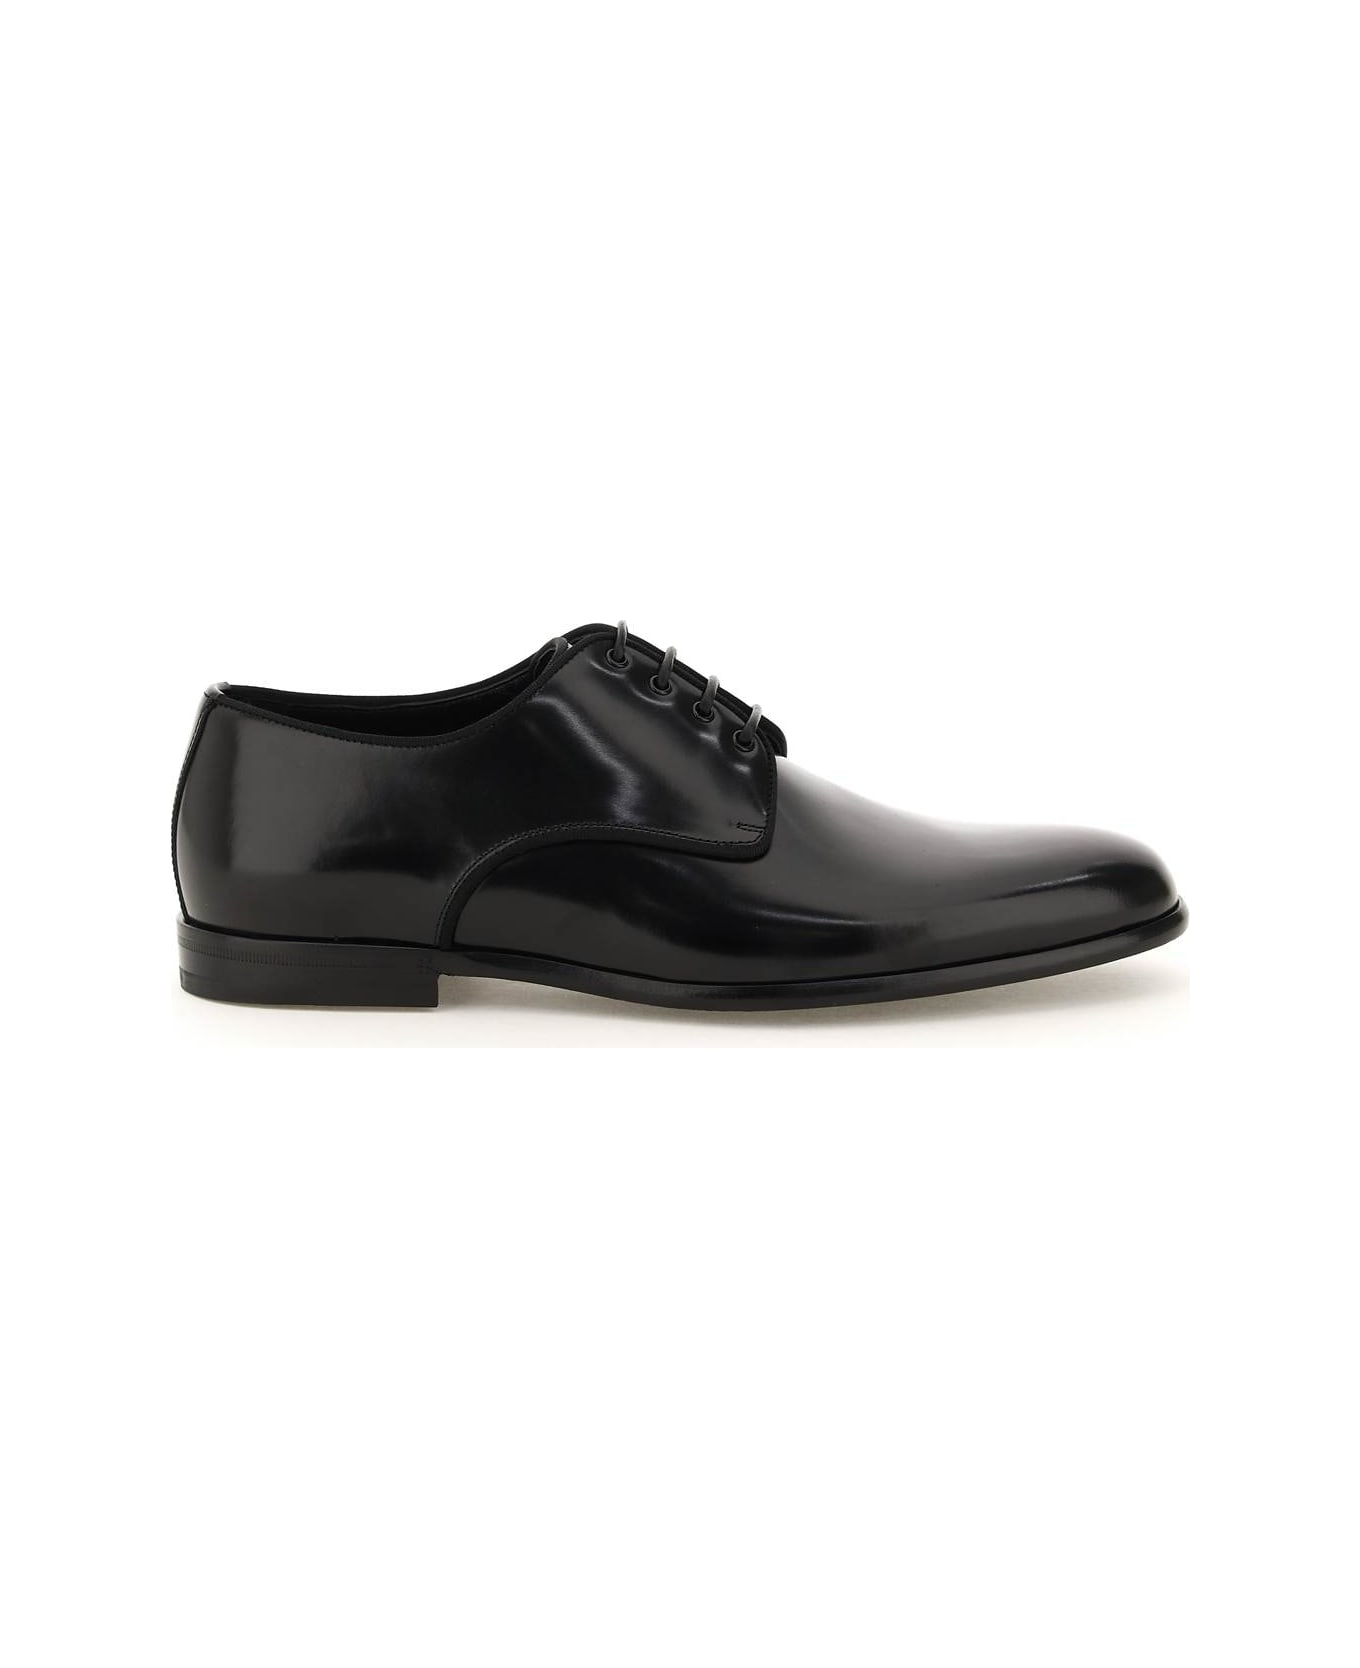 Camper Balloon cut-out wedge sandals Raffaello Brushed Leather Derby Reago shoes - BLACK (Black)